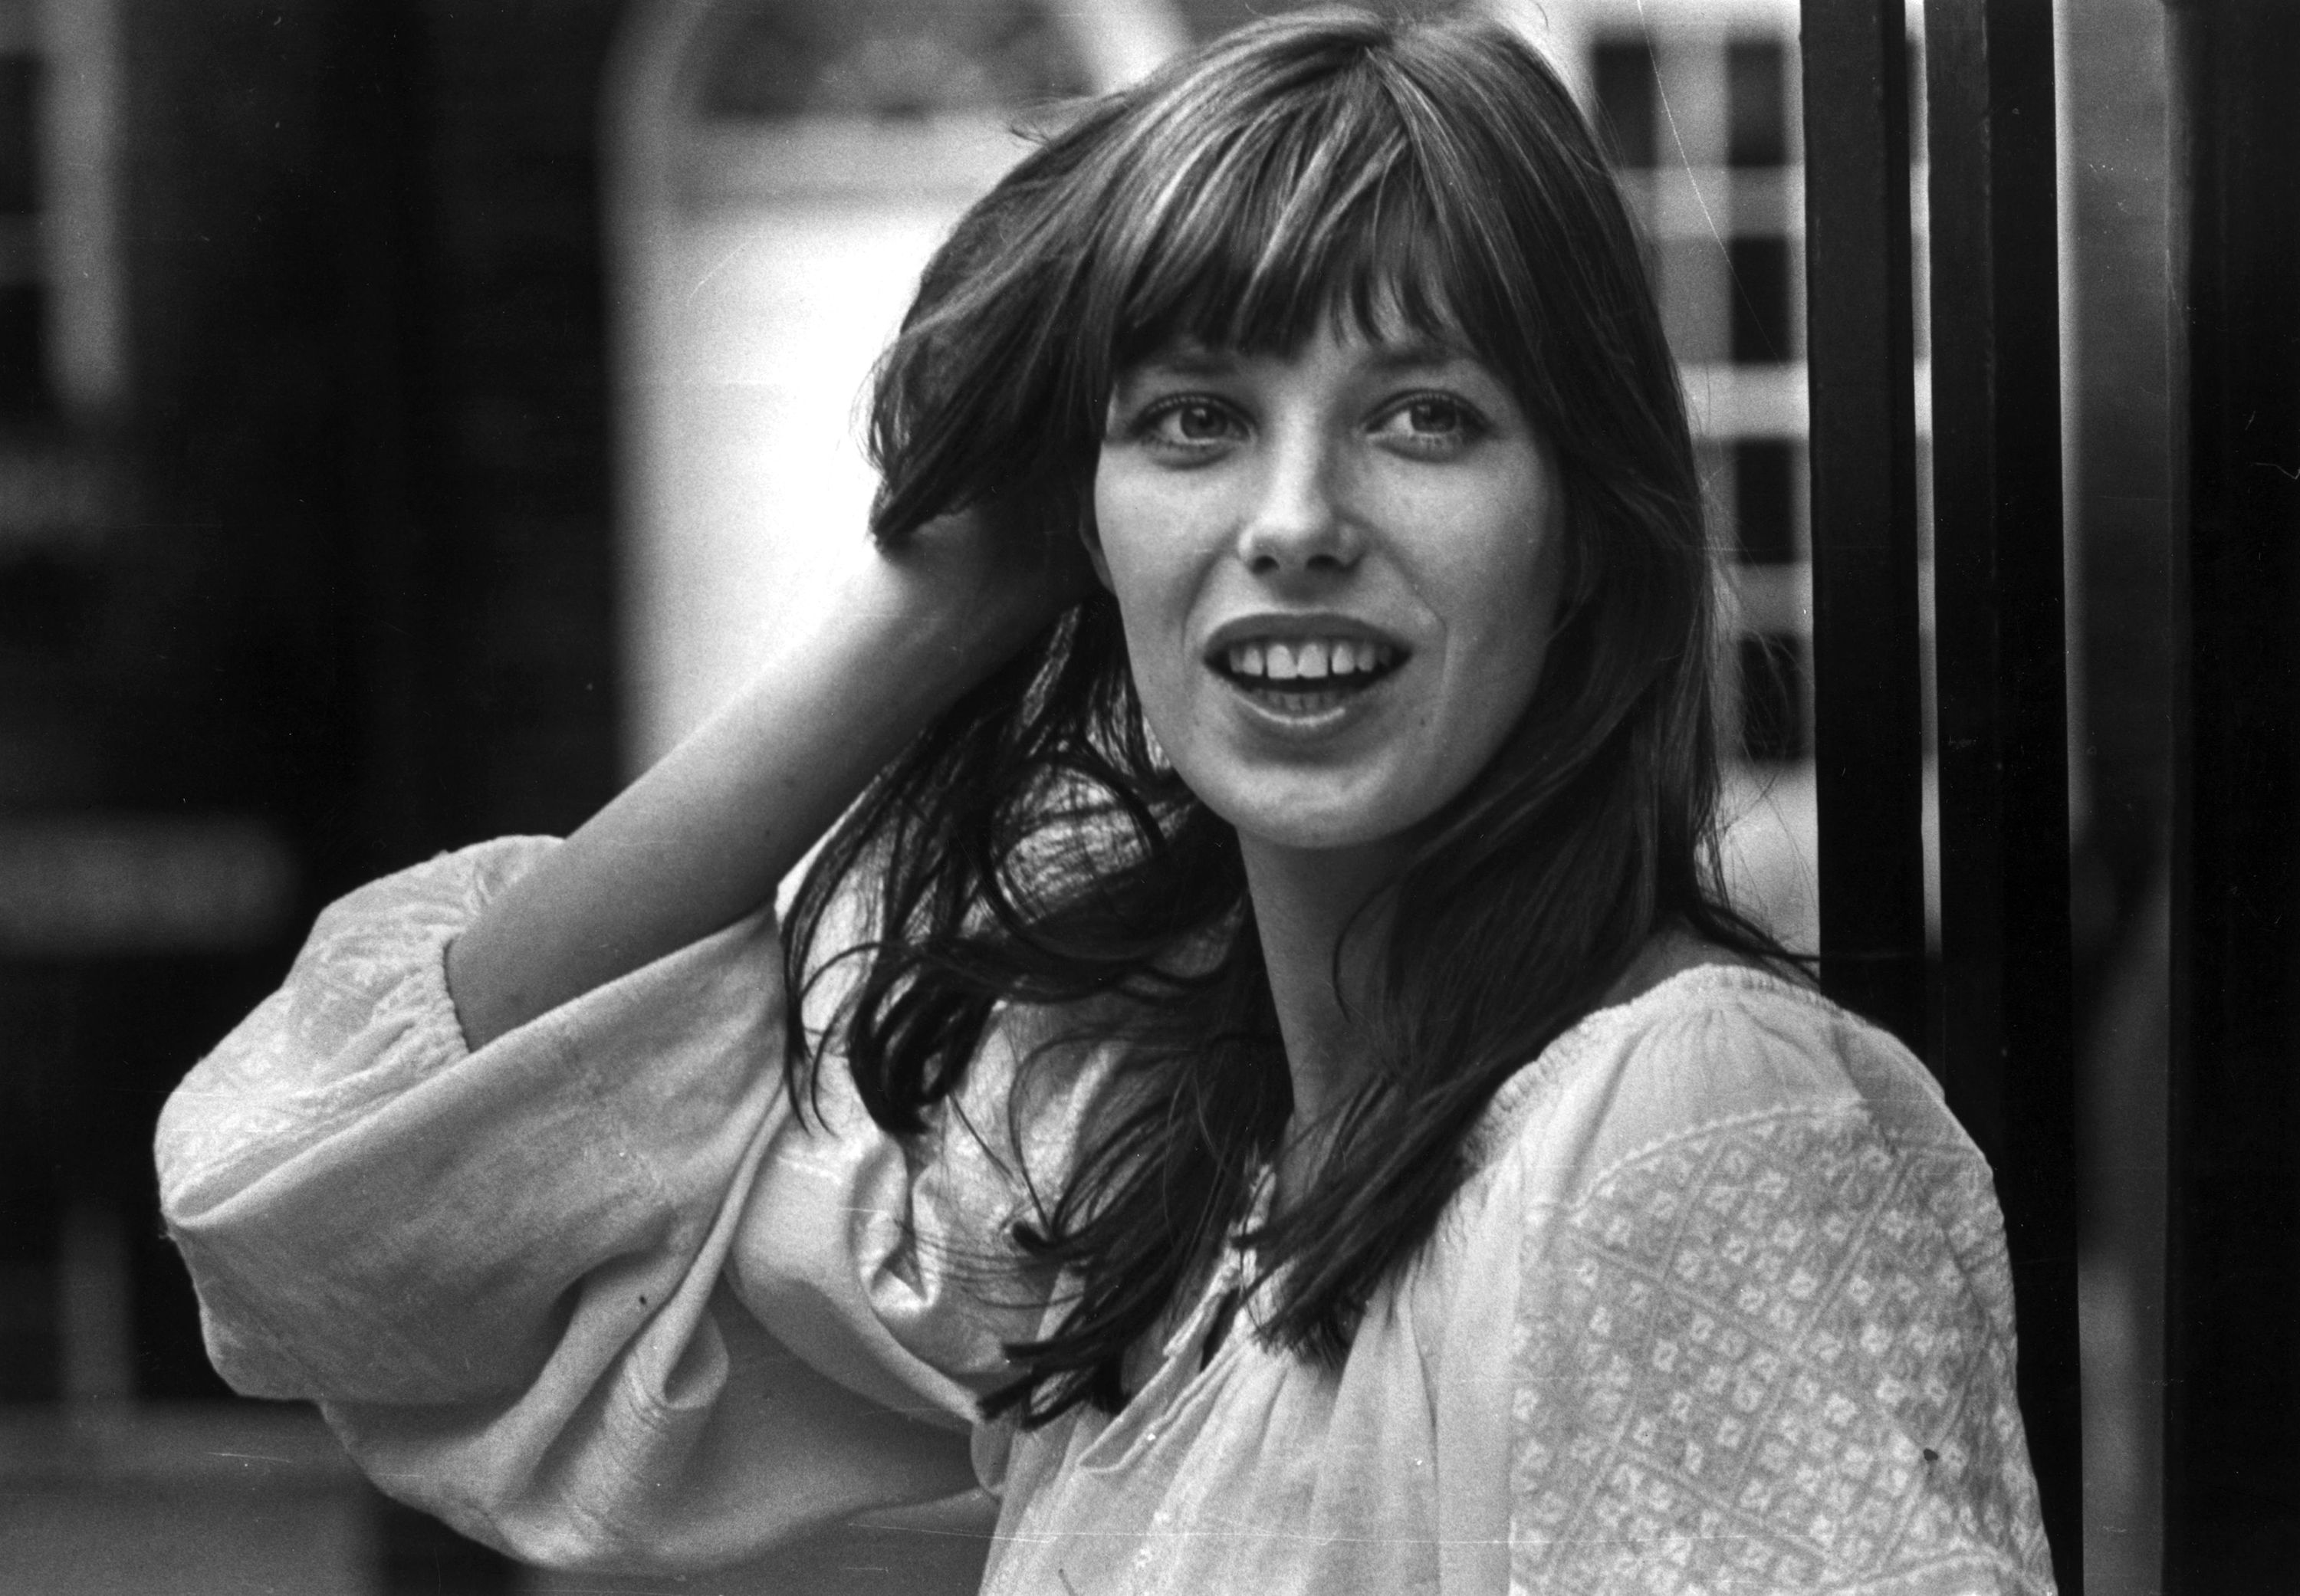 Actress Jane Birkin asks Hermes to remove her name from its iconic